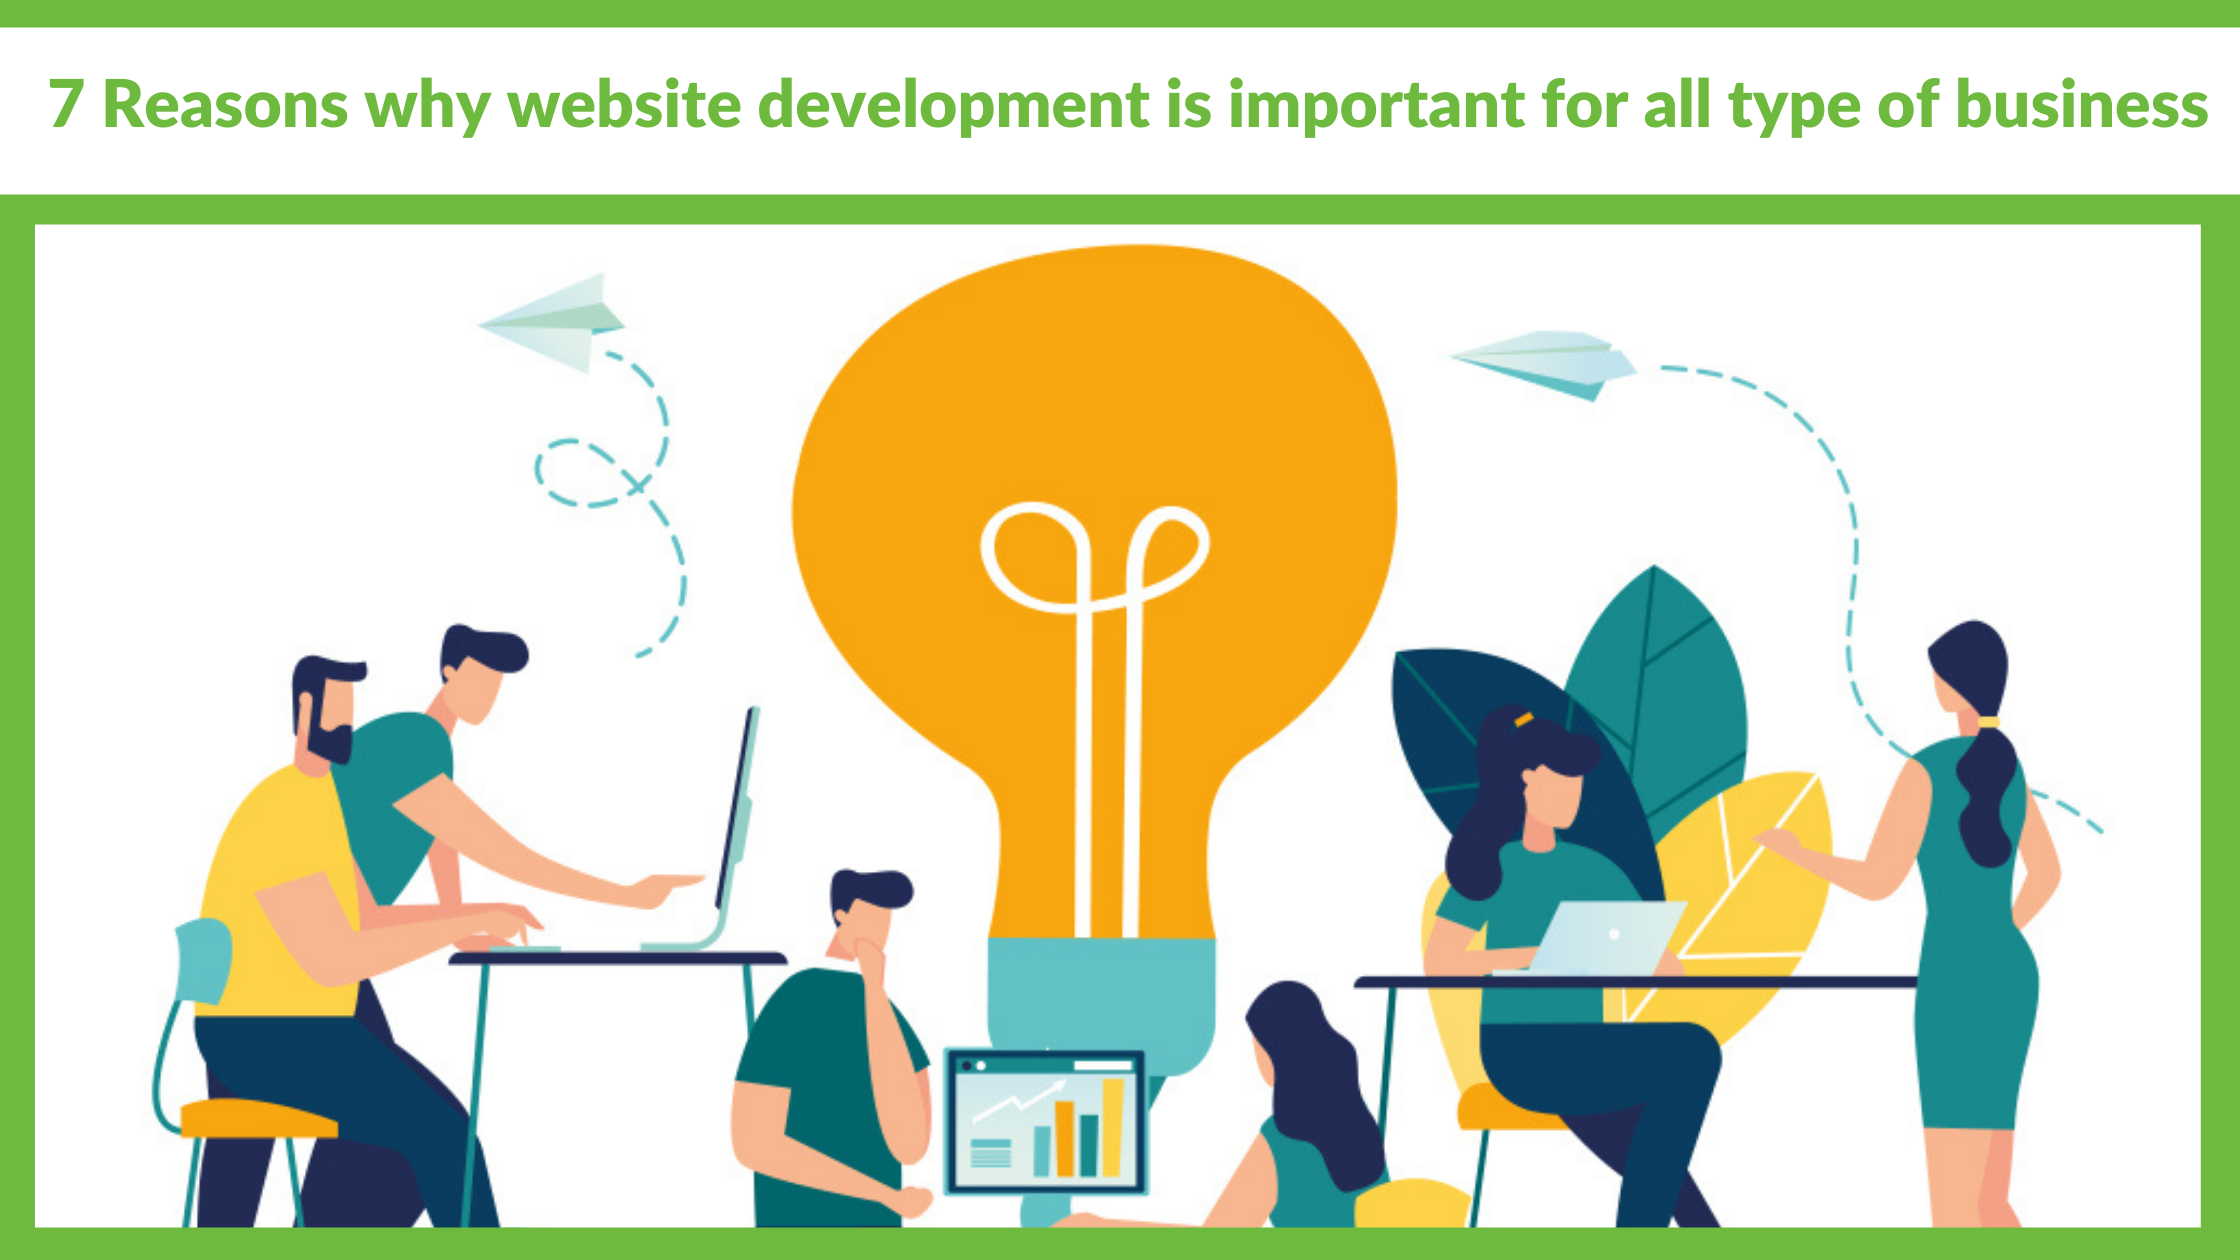 7 Reasons why website development is important for all types of businesses